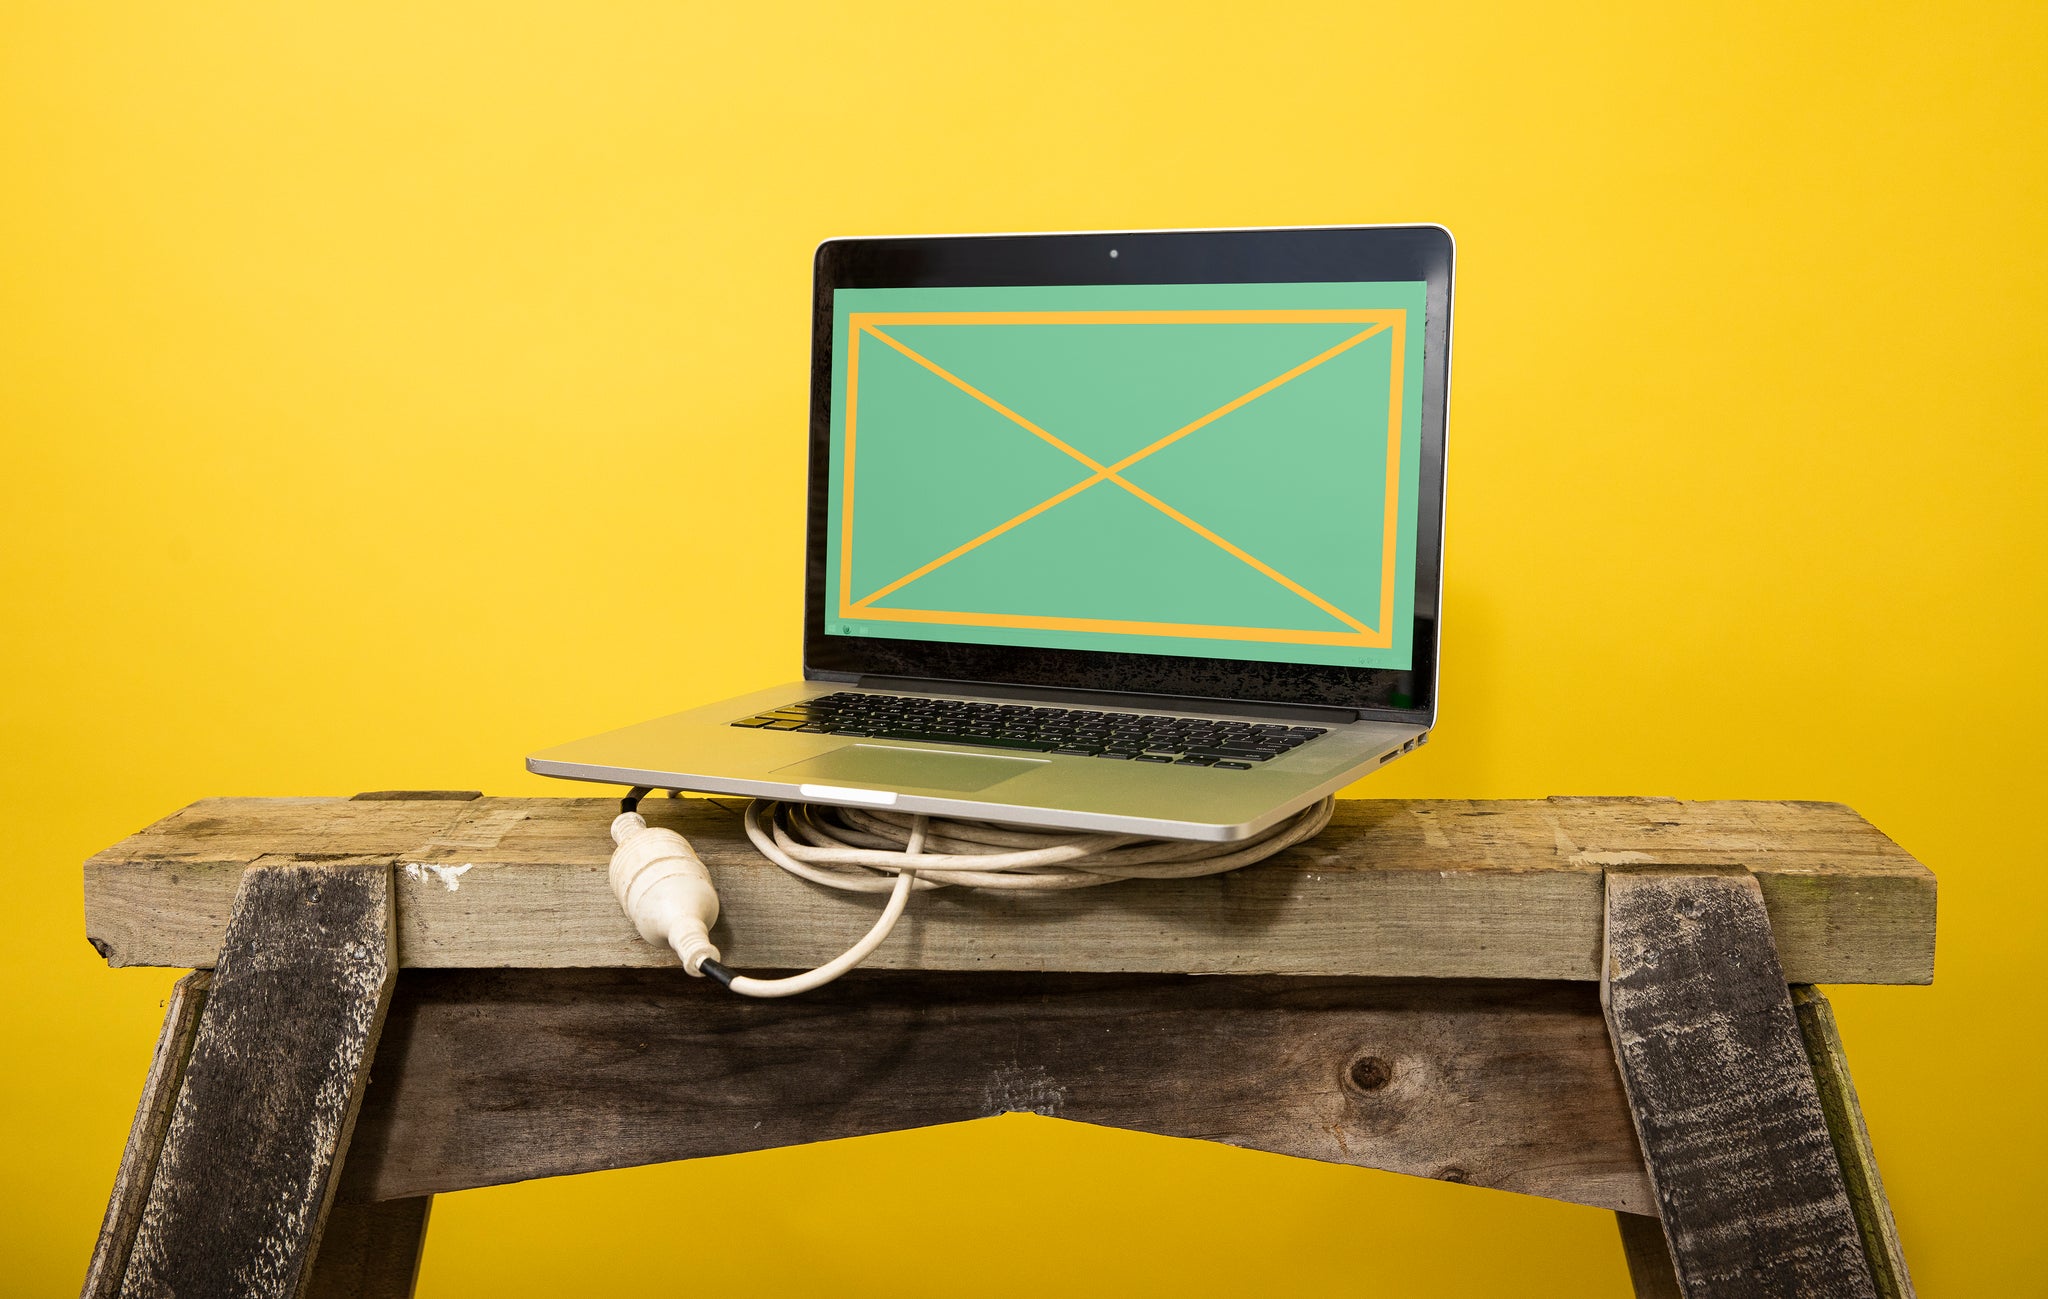 Landscape close-up of a MacBook computer atop a white power cable and wooden saw horse in front of a yellow backdrop. The screen is green and yellow.